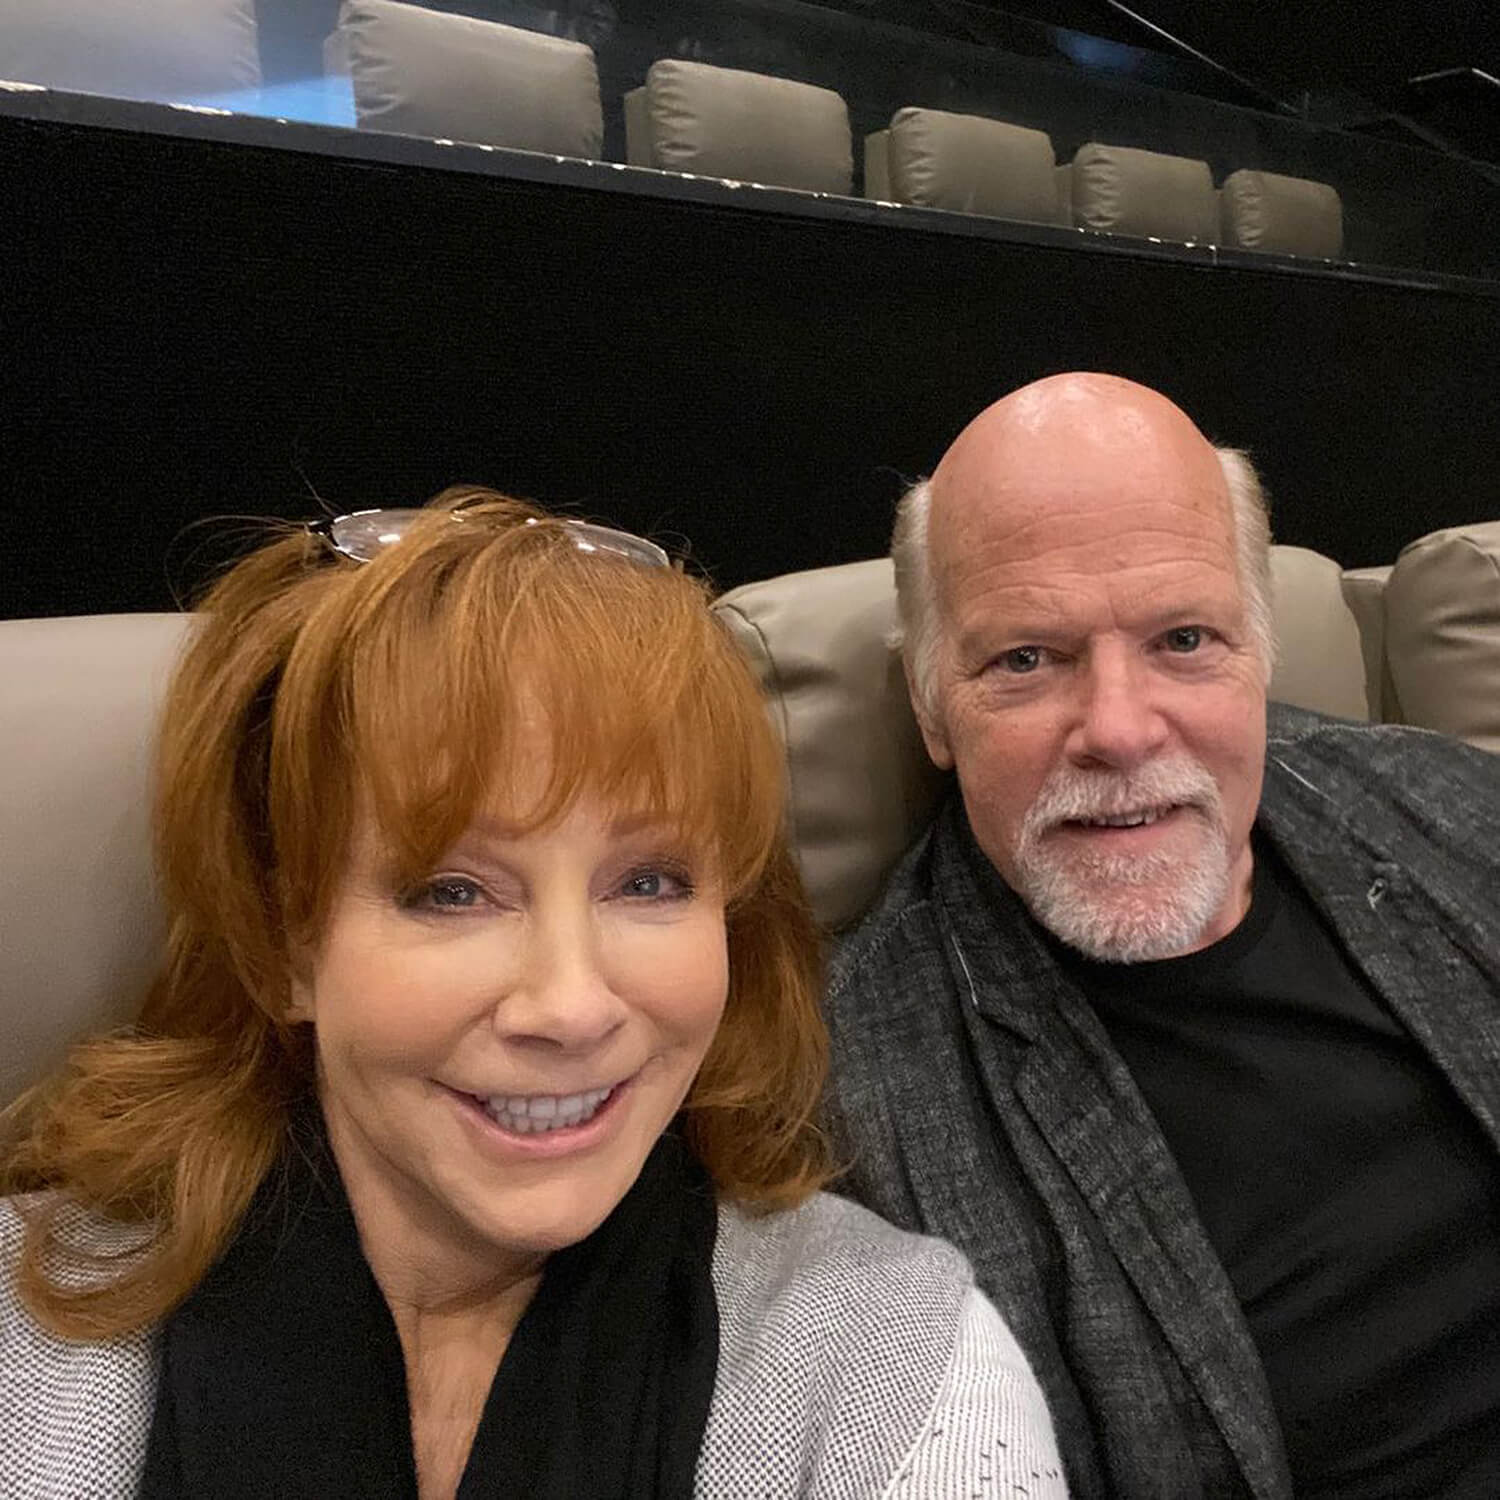 Reba McEntire is umarried but in a serious relationship with Rex Linn